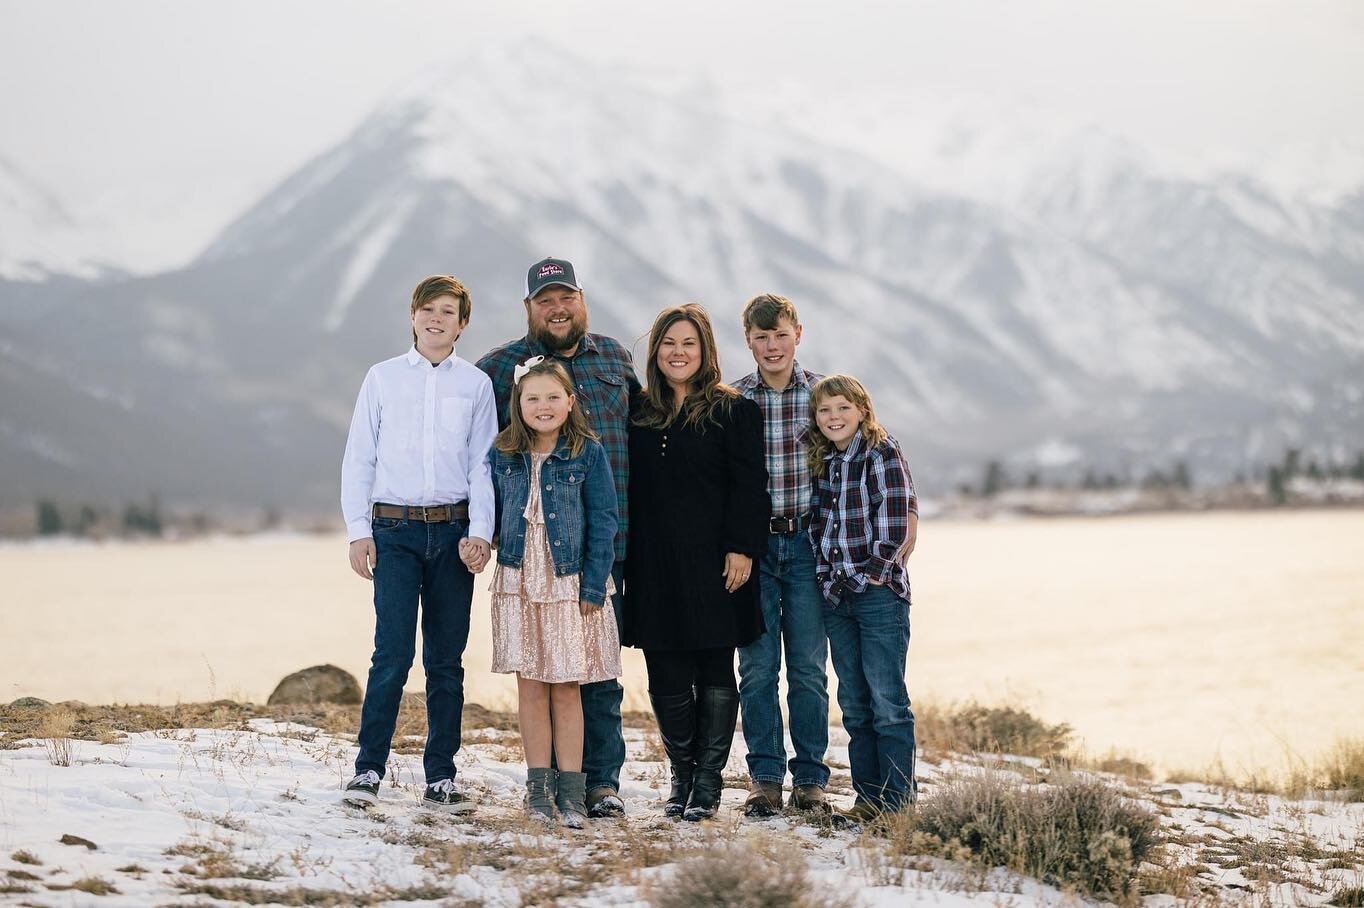 This is 10 years of photographing the Courson family! These kids are THE best and so much fun! It has been such a treat to watch them grow up in front of my camera! And, it's definitely gotten easier year after year to get smiles out of everyone! Enj